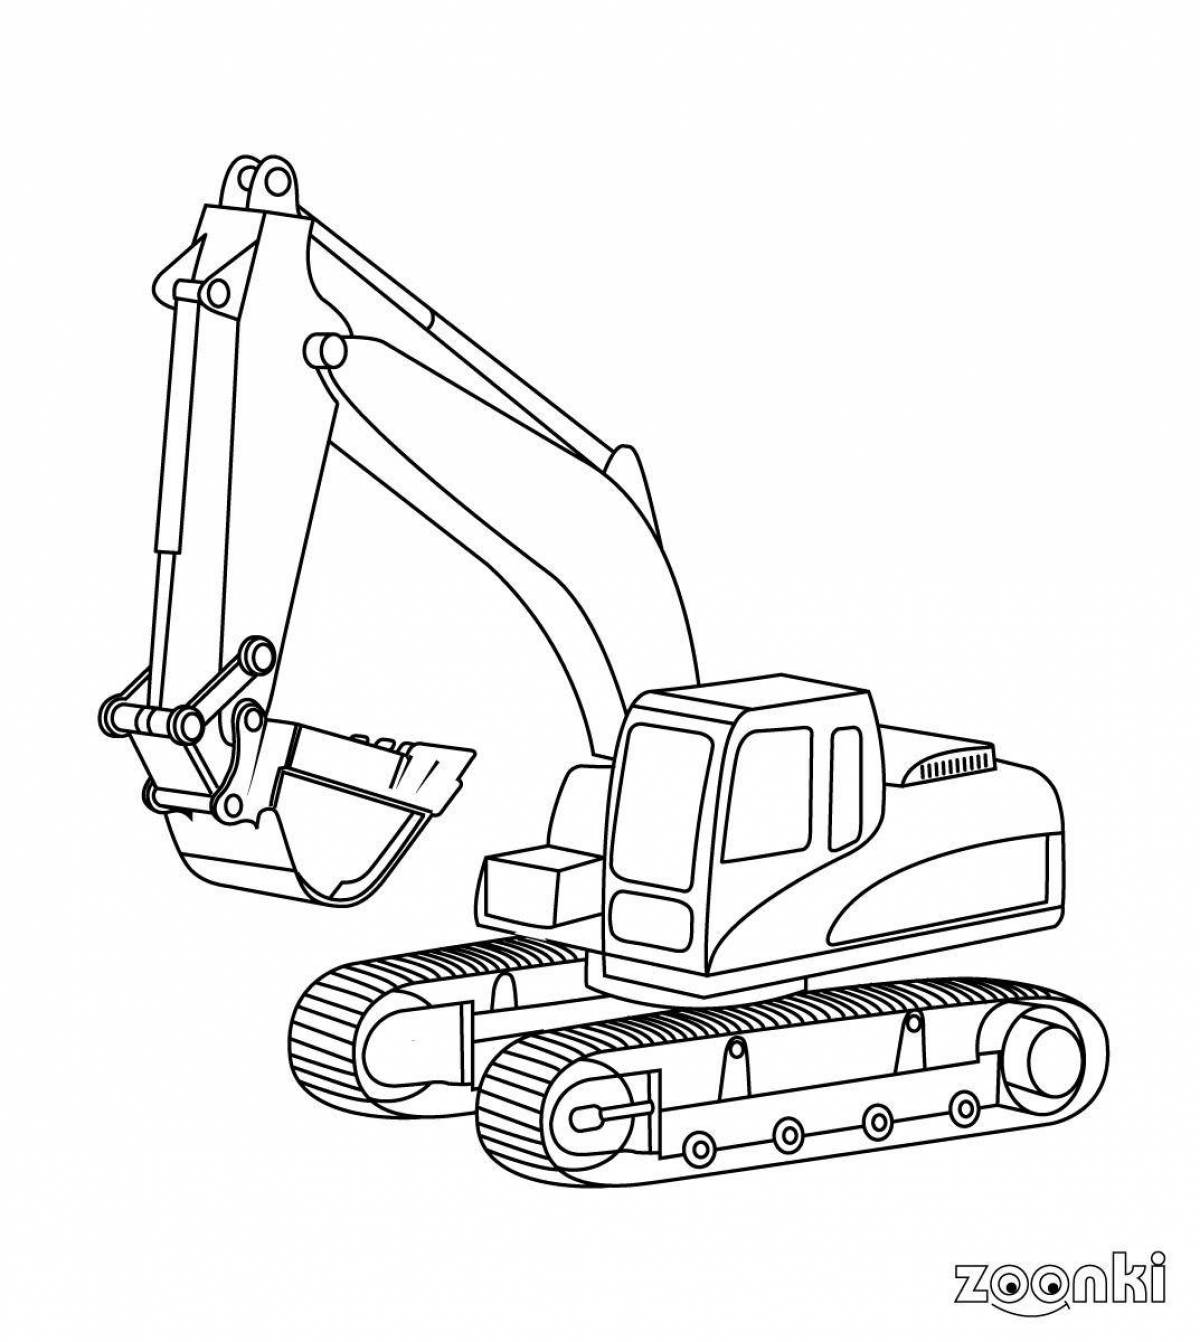 A playful excavator coloring book for 2-3 year olds